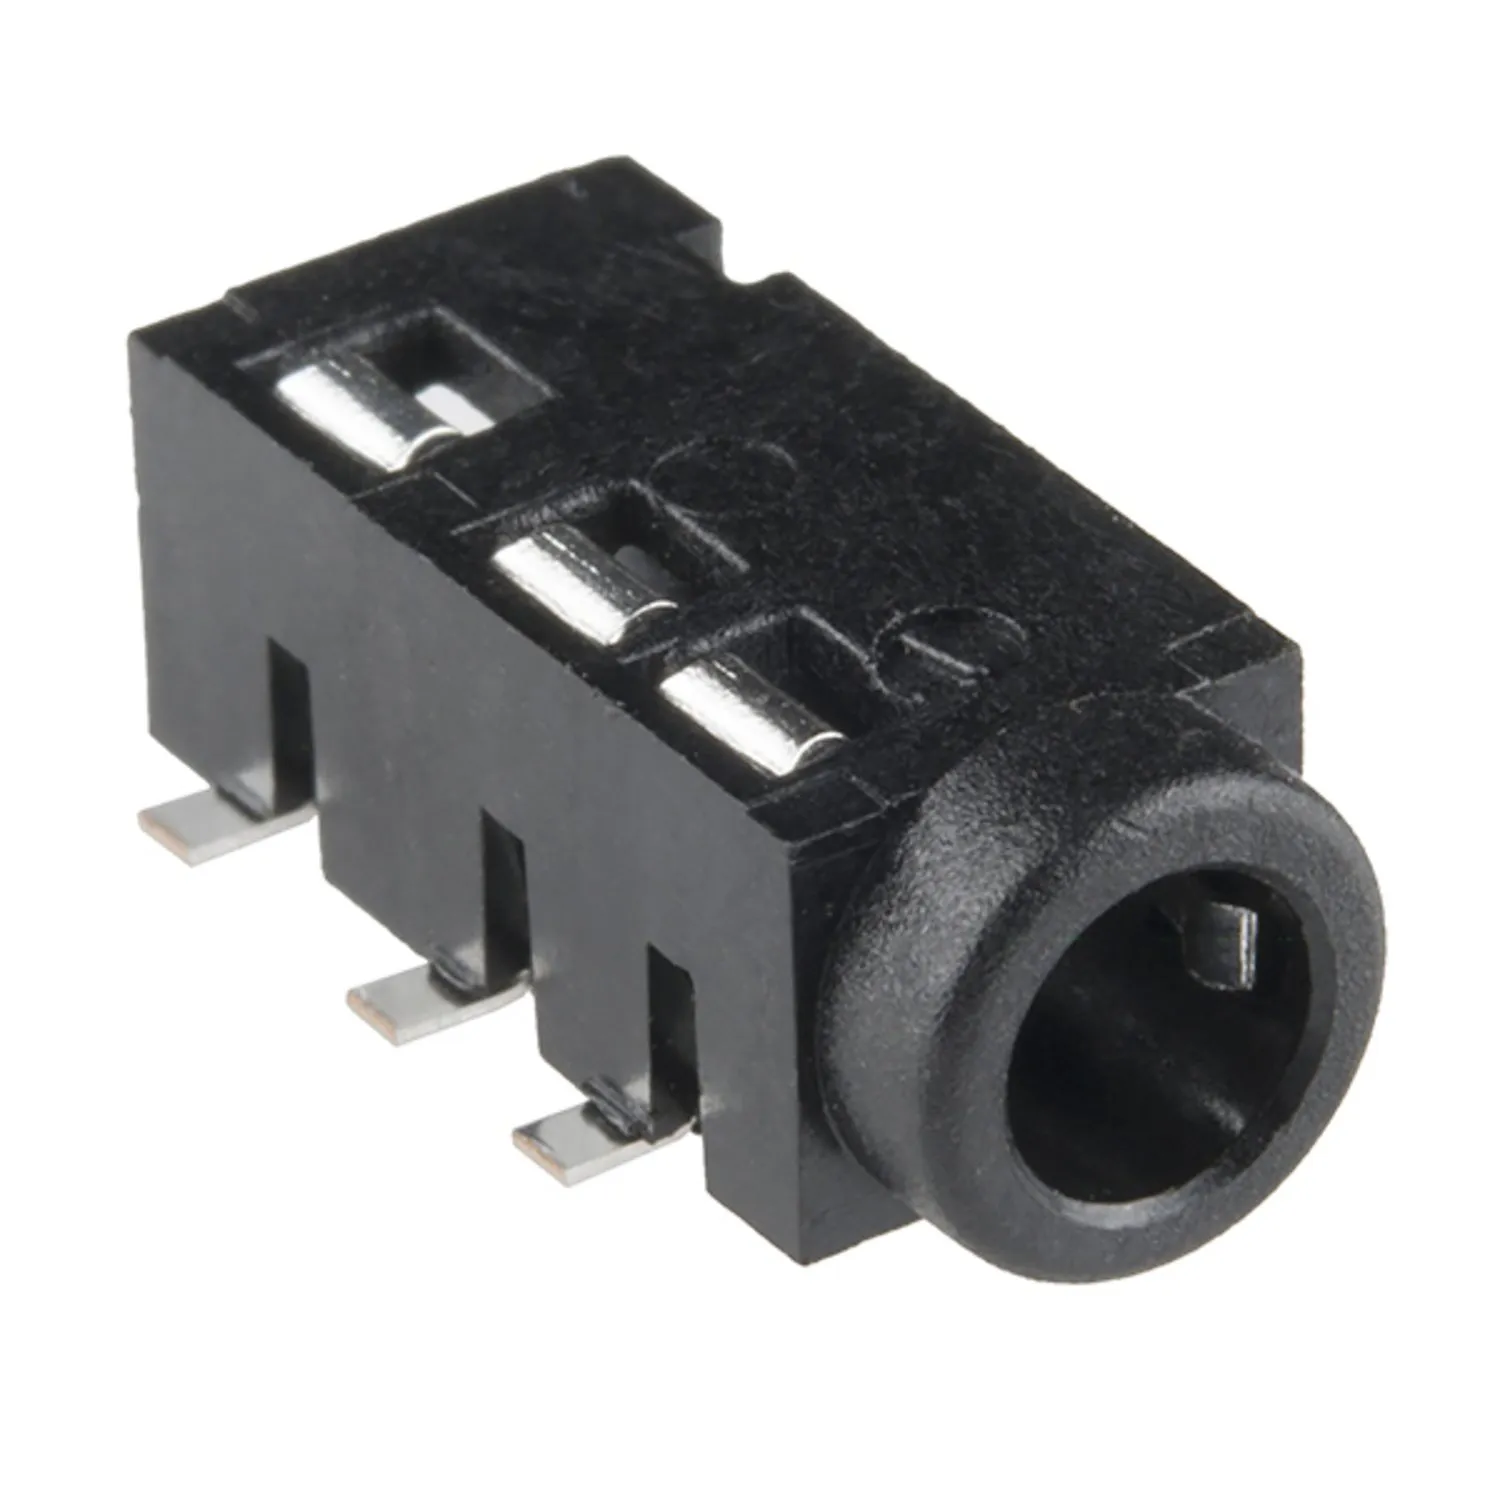 Photo of Audio Jack - 3.5mm TRRS (SMD)